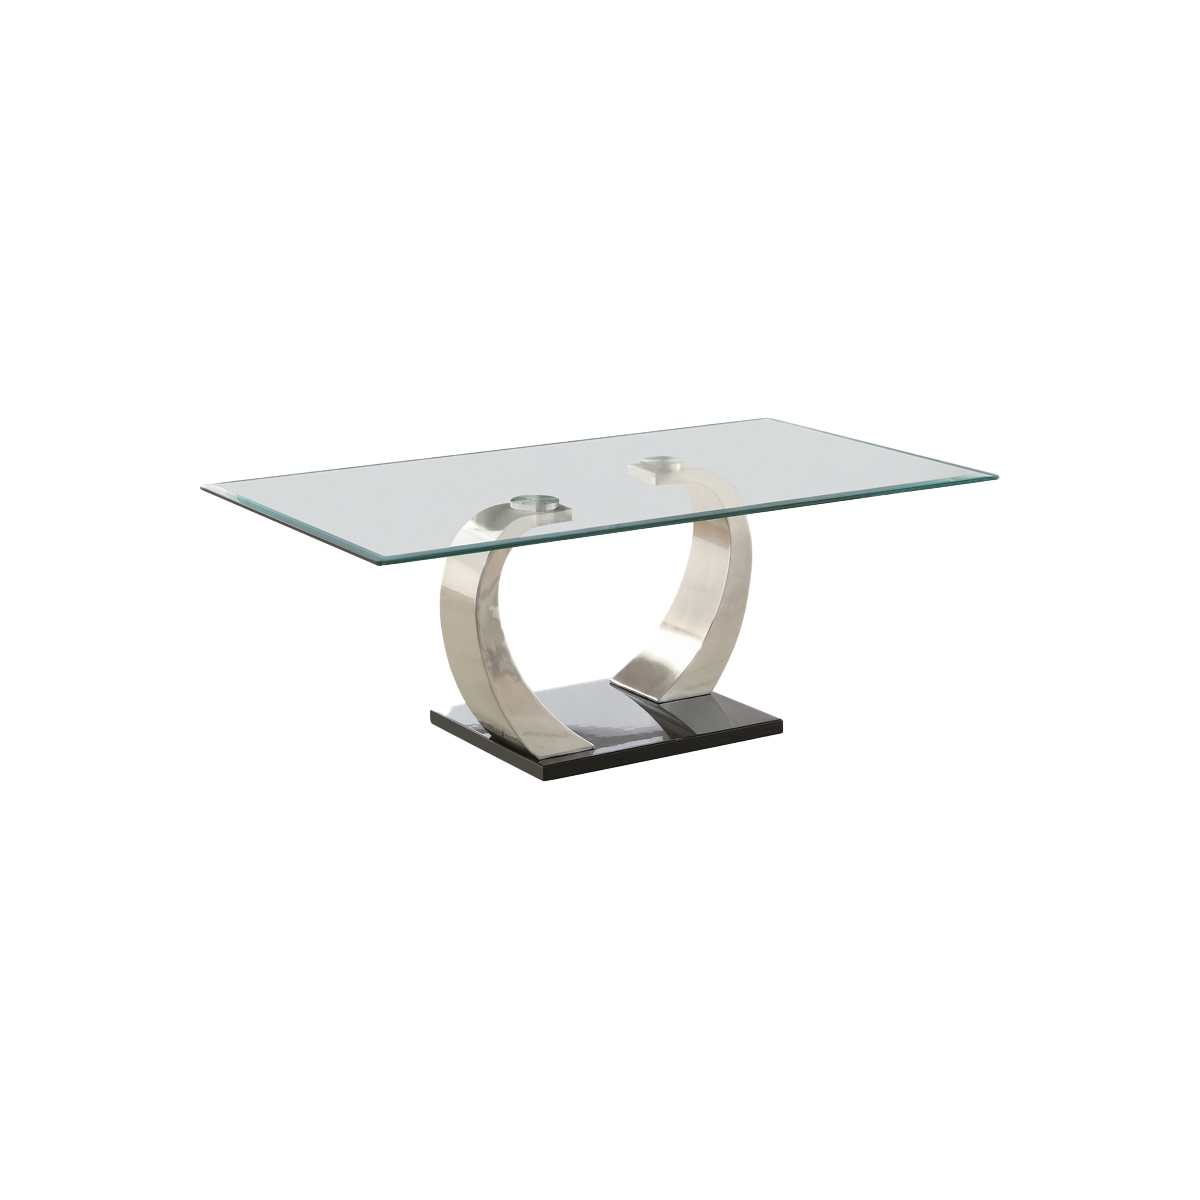 Floating Glass Top Coffee Table With Metal Support, Clear And Silver- Saltoro Sherpi